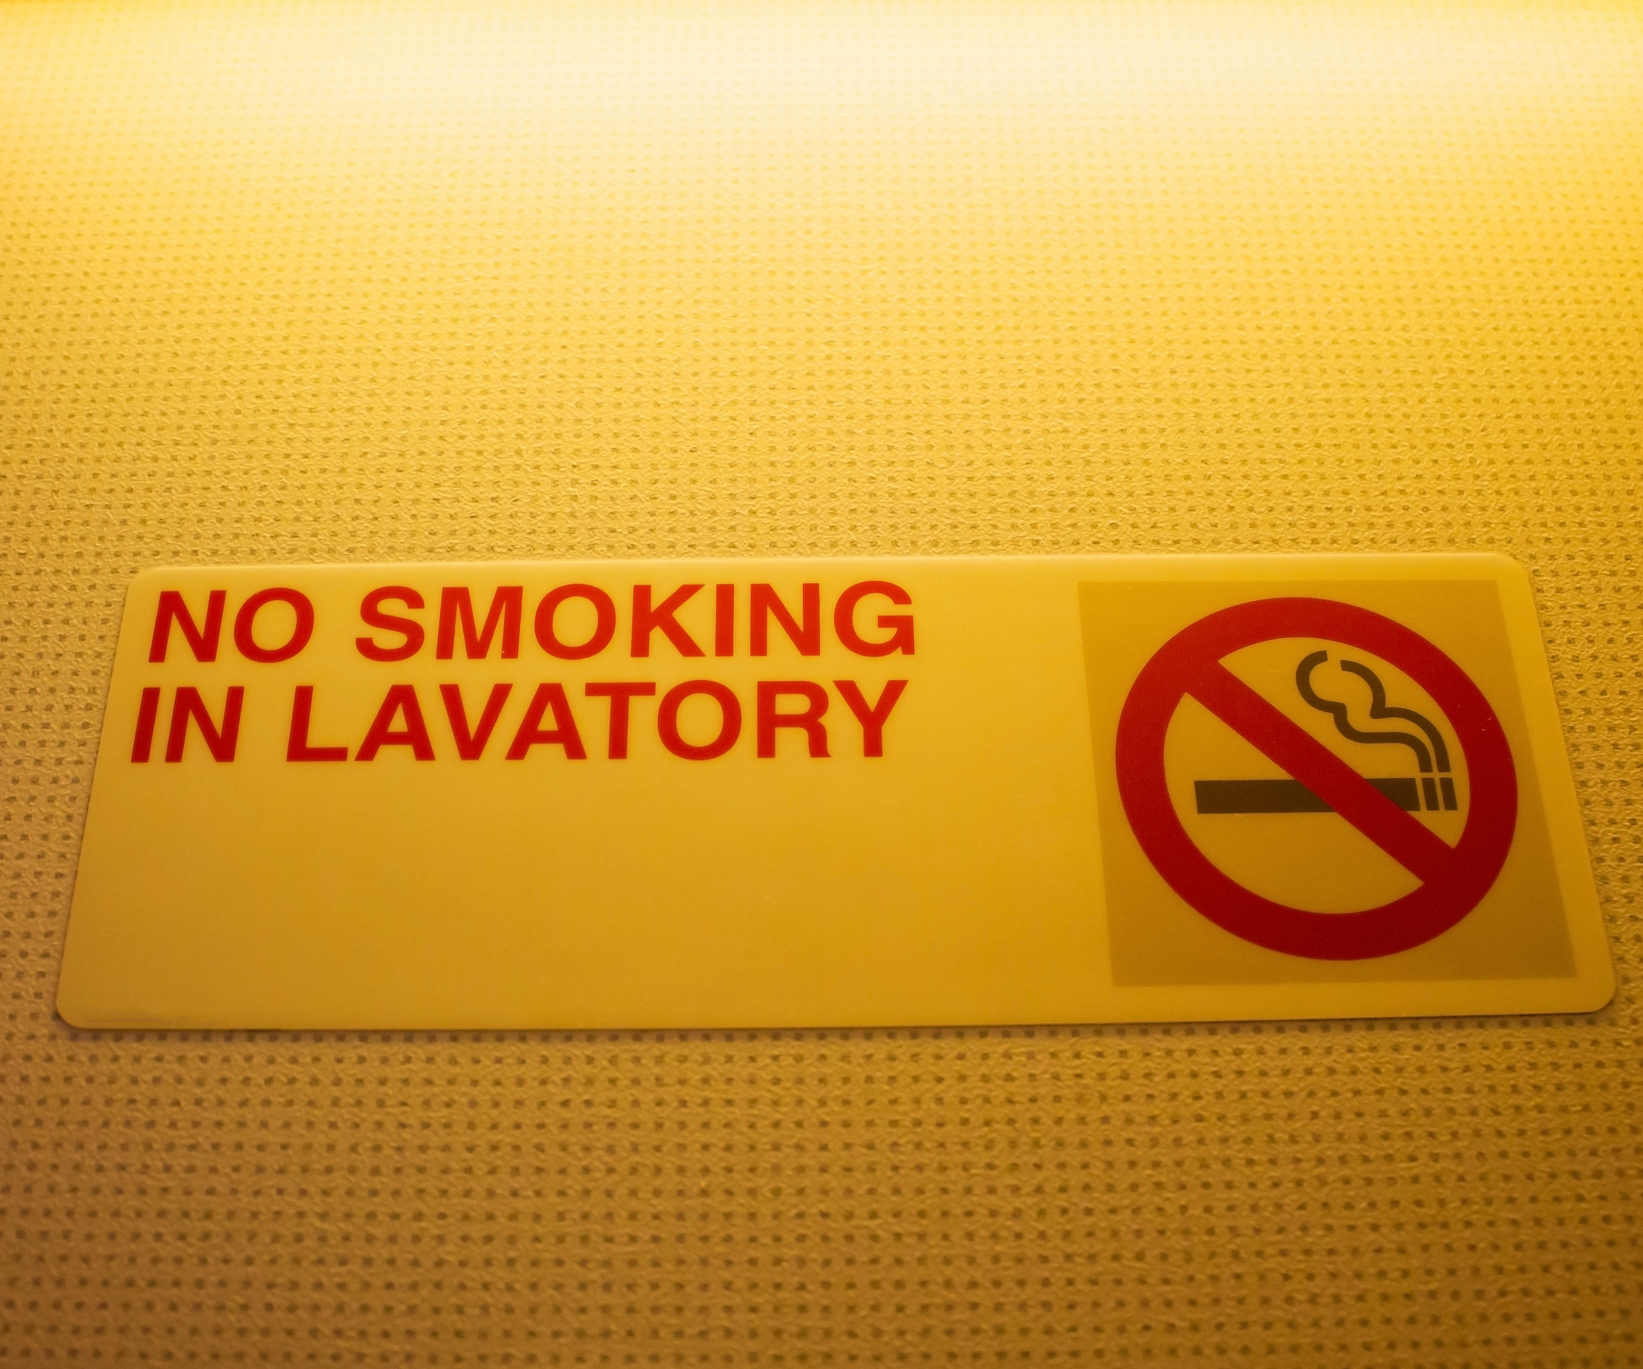 This is why plane toilets have ashtrays – even though smoking is banned